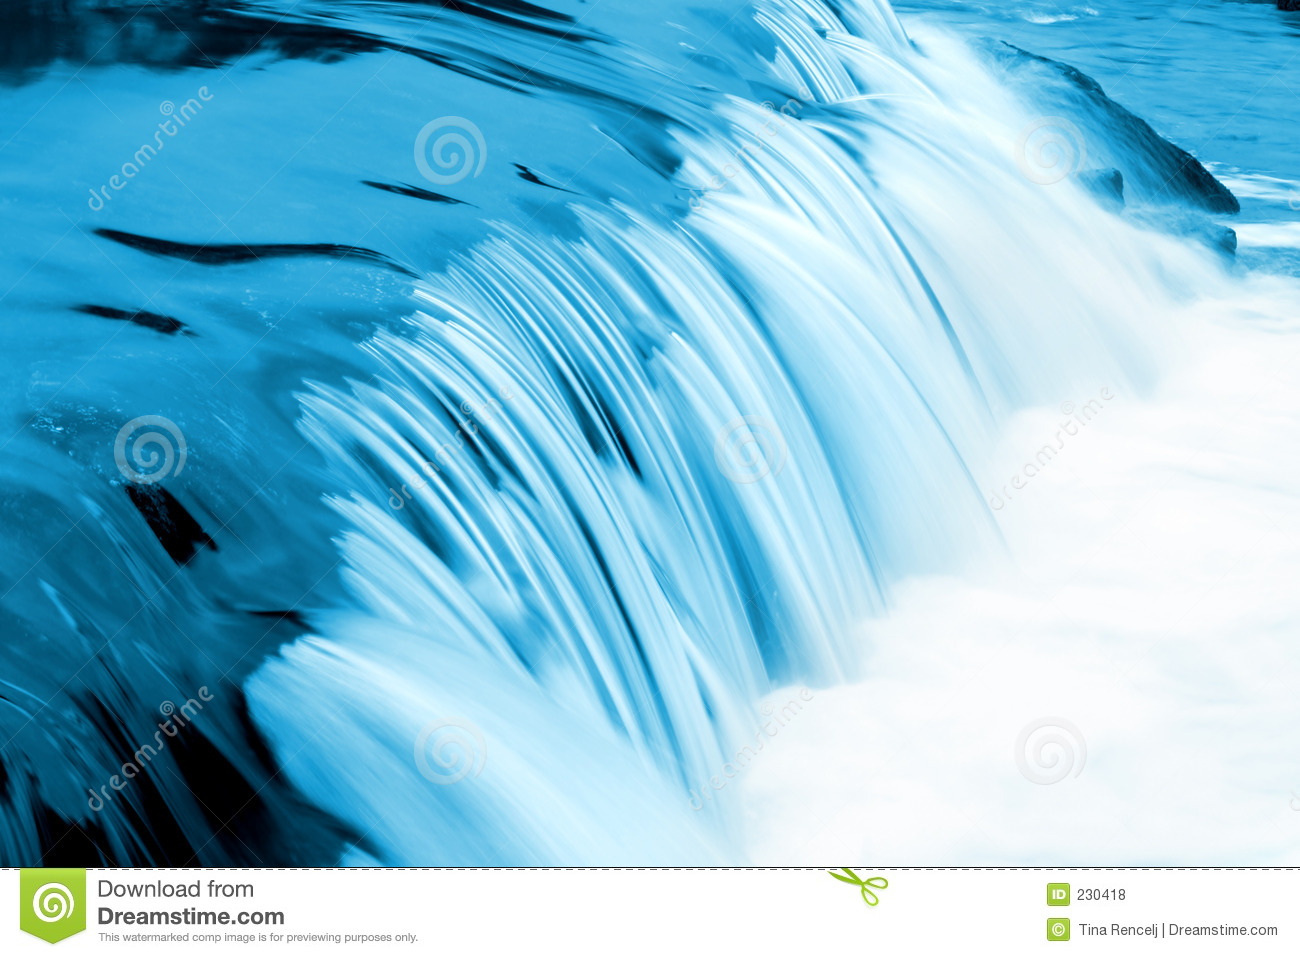 Blue Water Flow Royalty Free Stock Photos   Image  230418